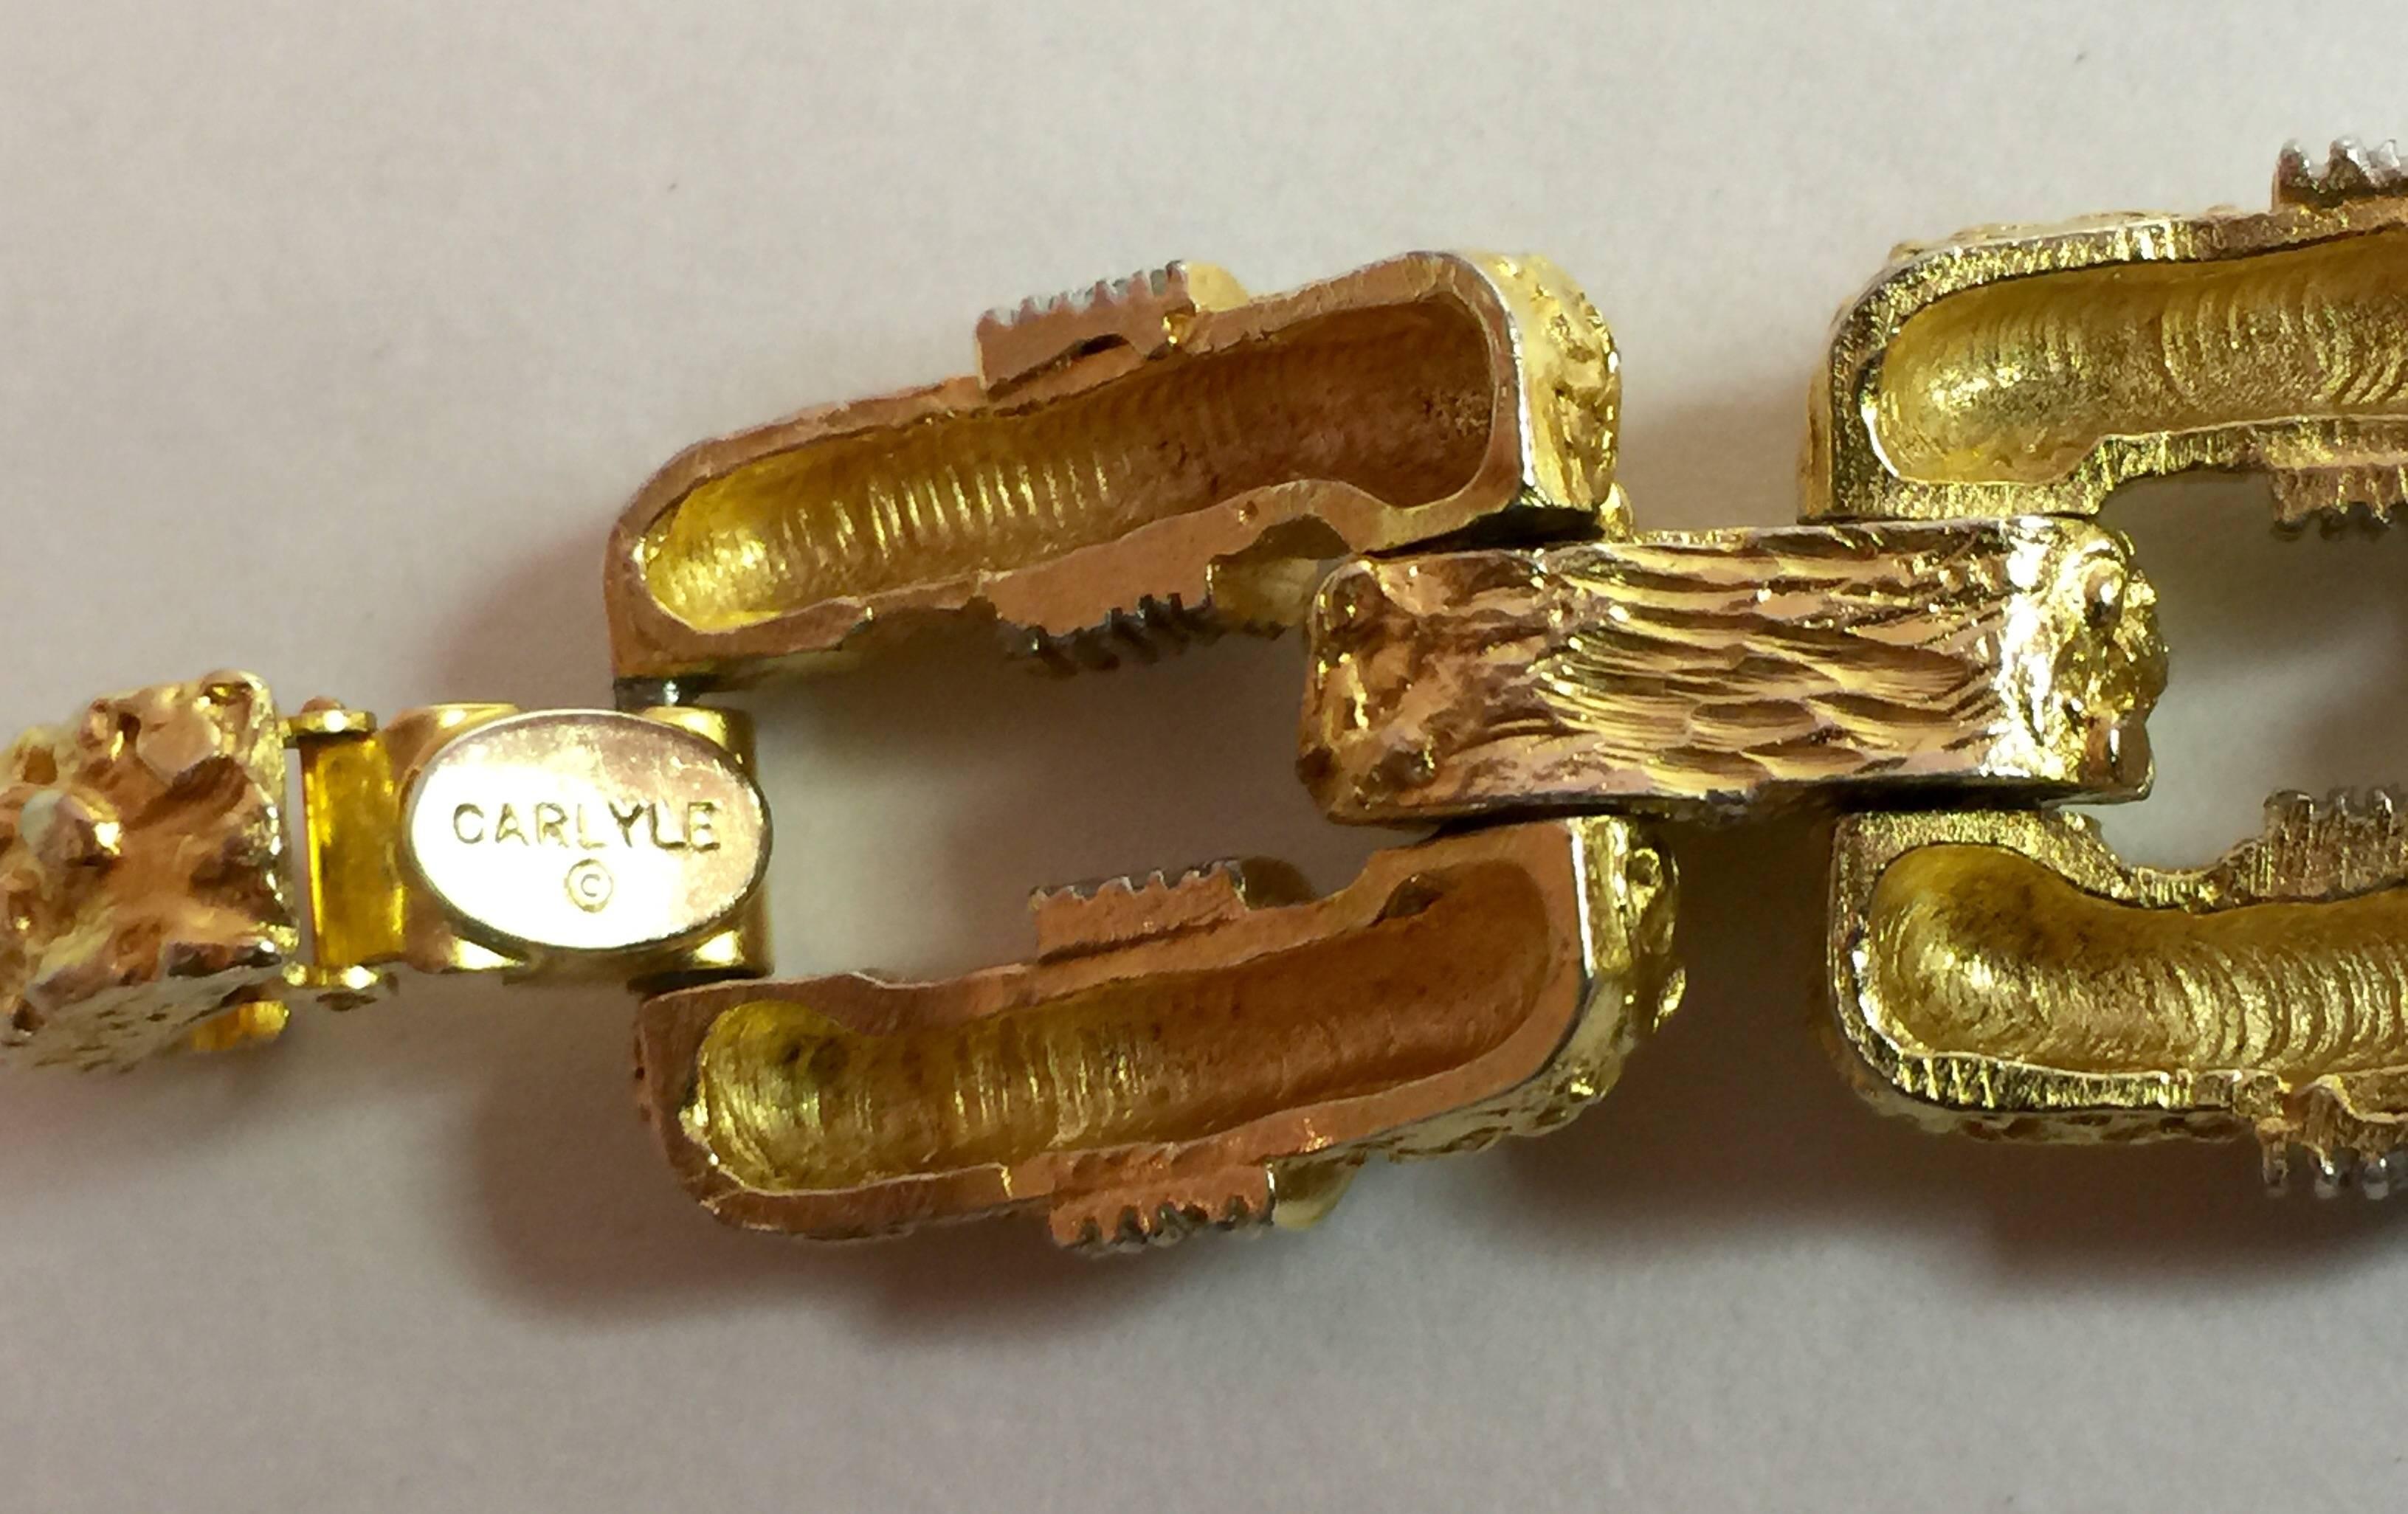 This 1960s CARLYLE Brutalist Goldtone and Pave Rhinestone Link Bracelet exhibits all the organic naturalist quality that textured goldtone jewelry  of this era is known for, and combines it with elegant rectangular classic link work and detailed